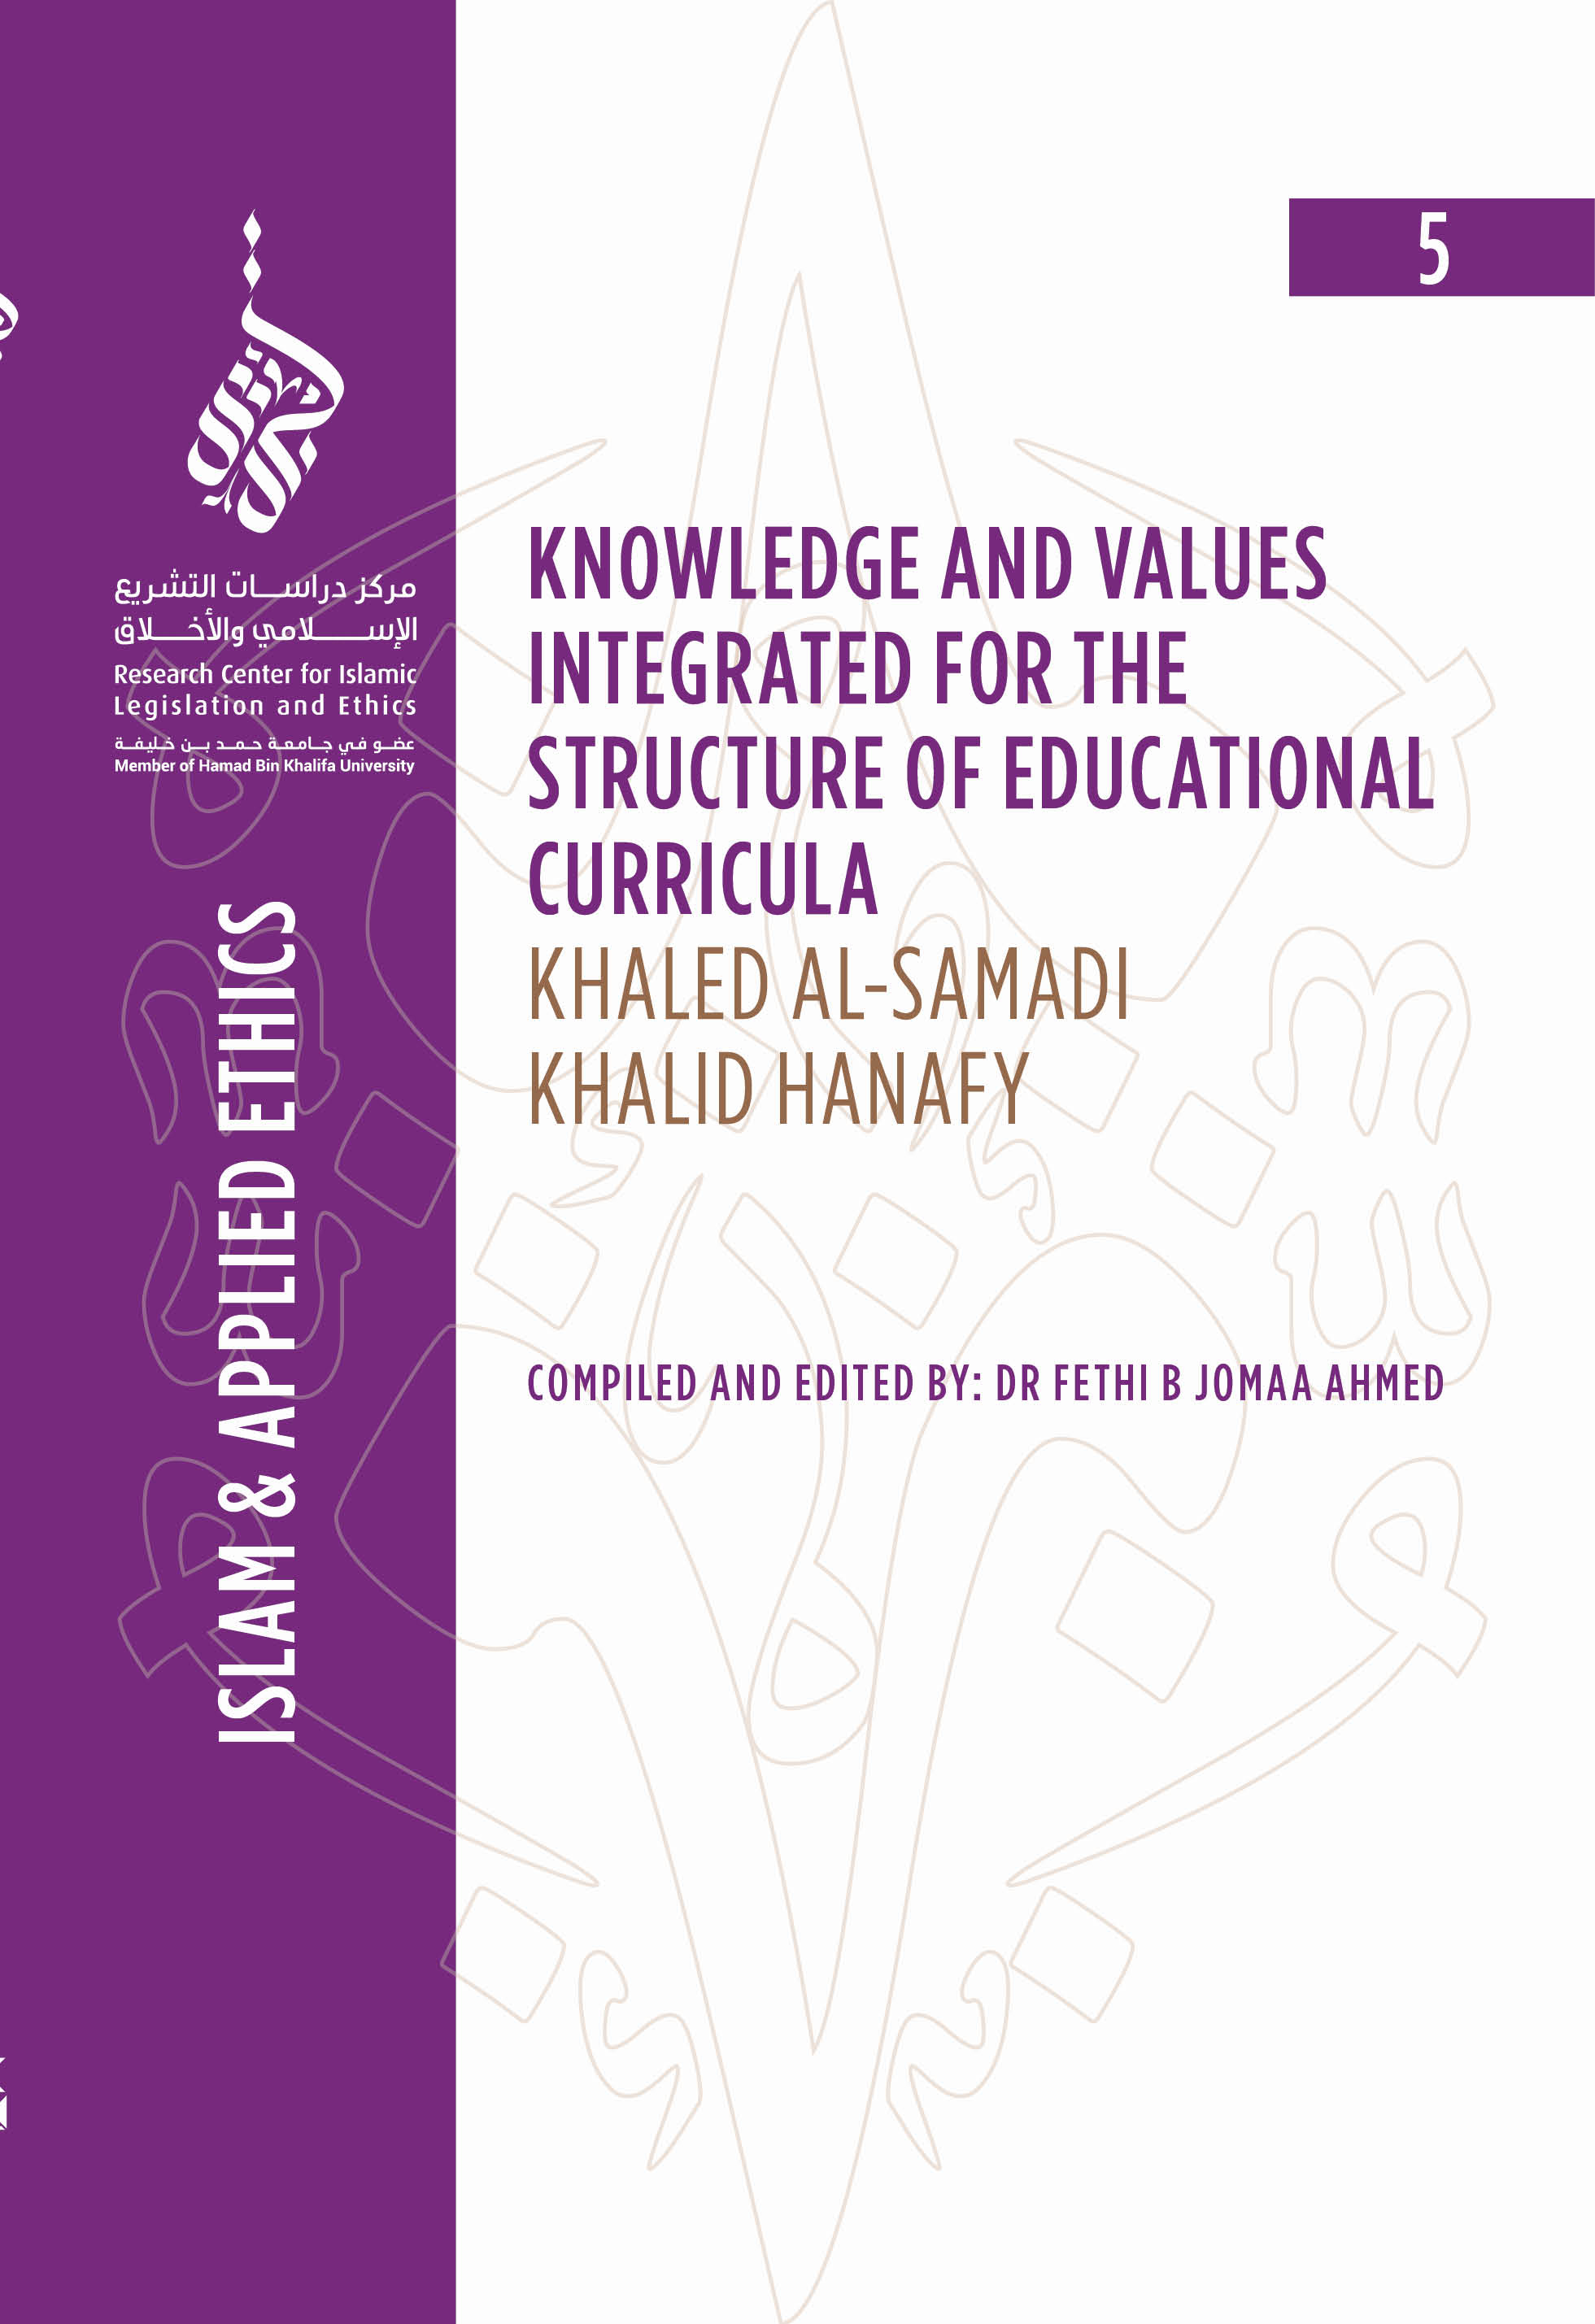 image of Knowledge and Values Integrated for the Structure of Educational Curricula